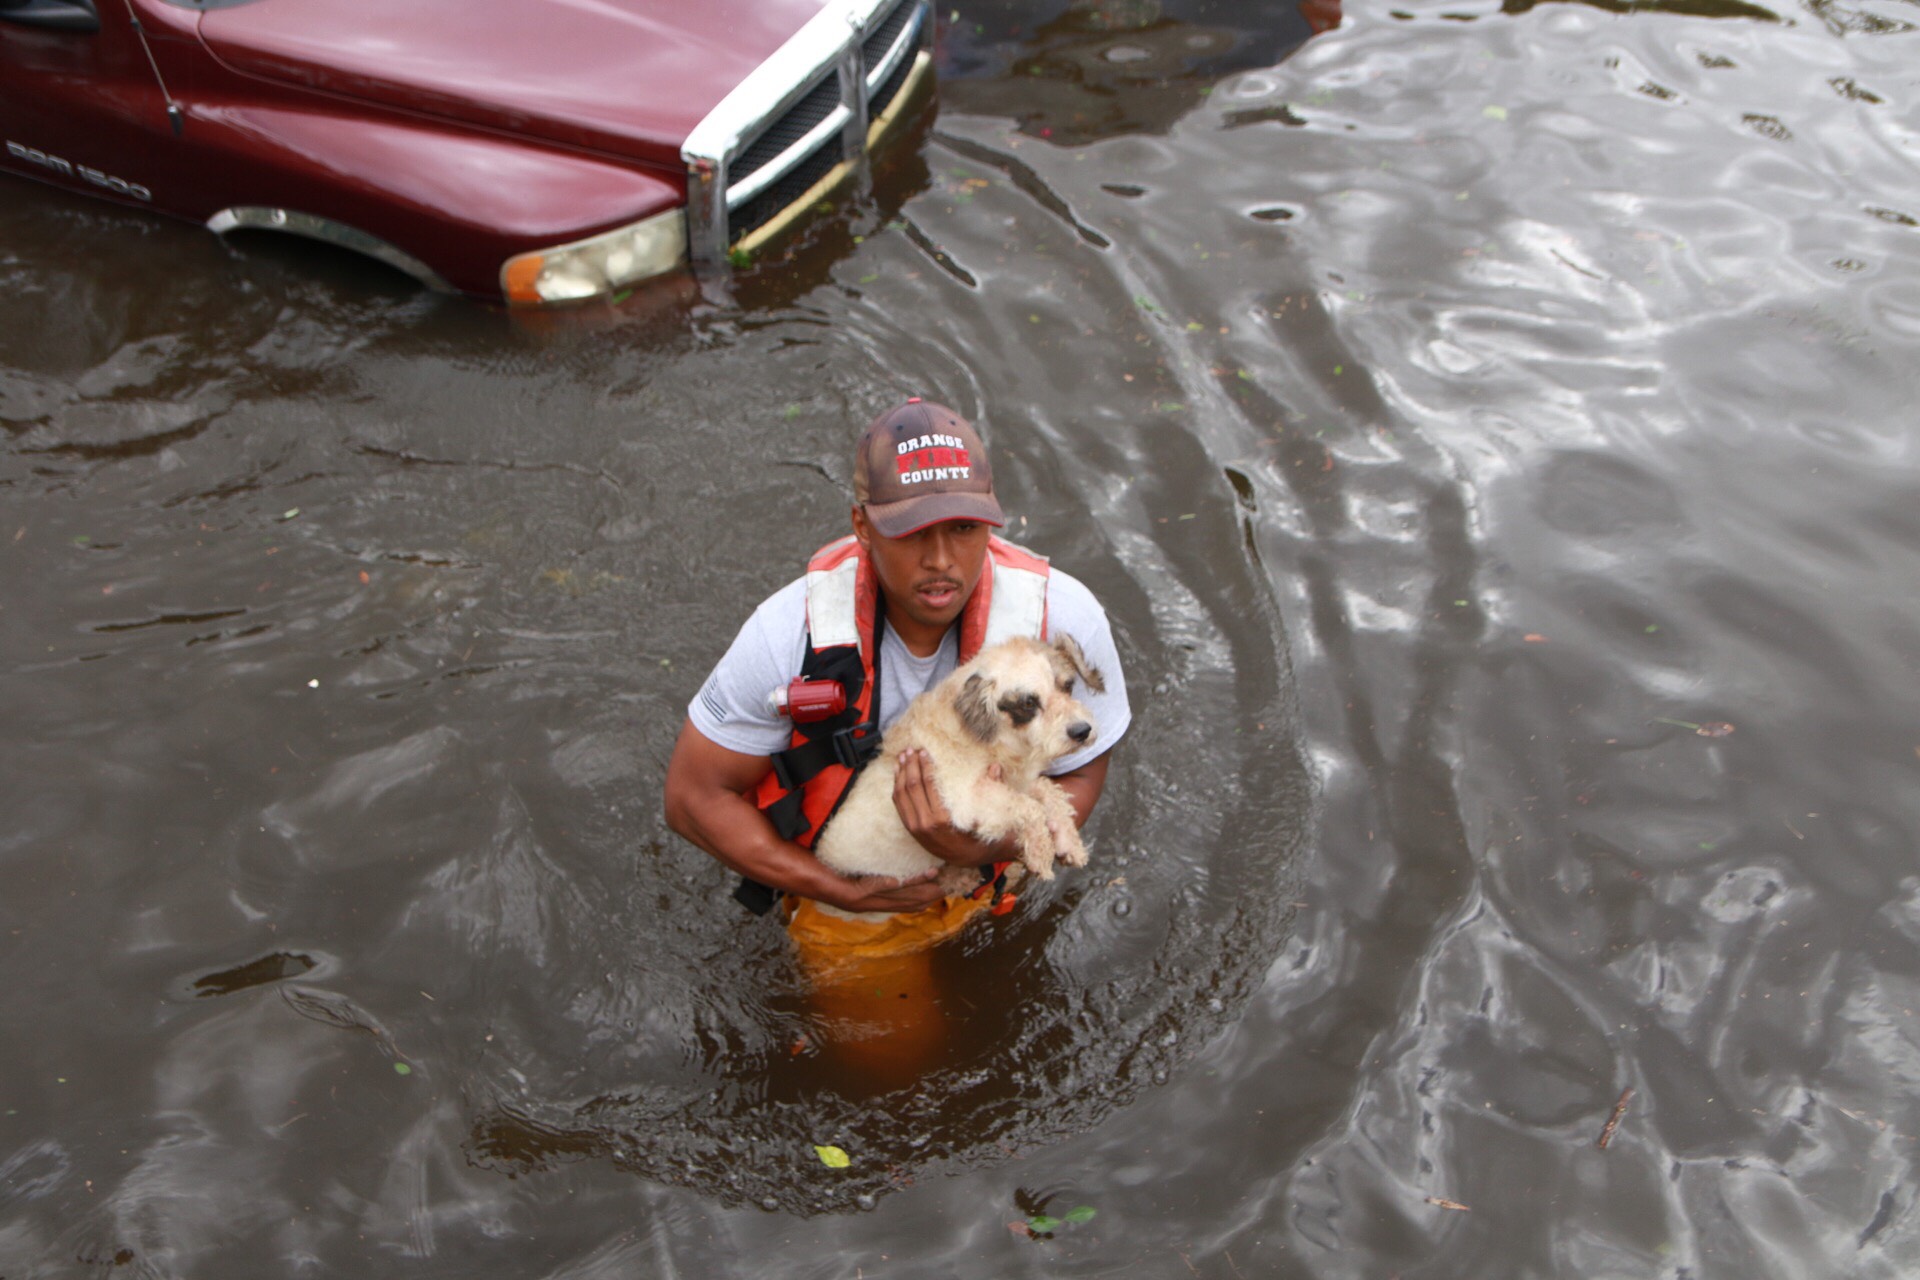 Emergency management employee with a rescued dog